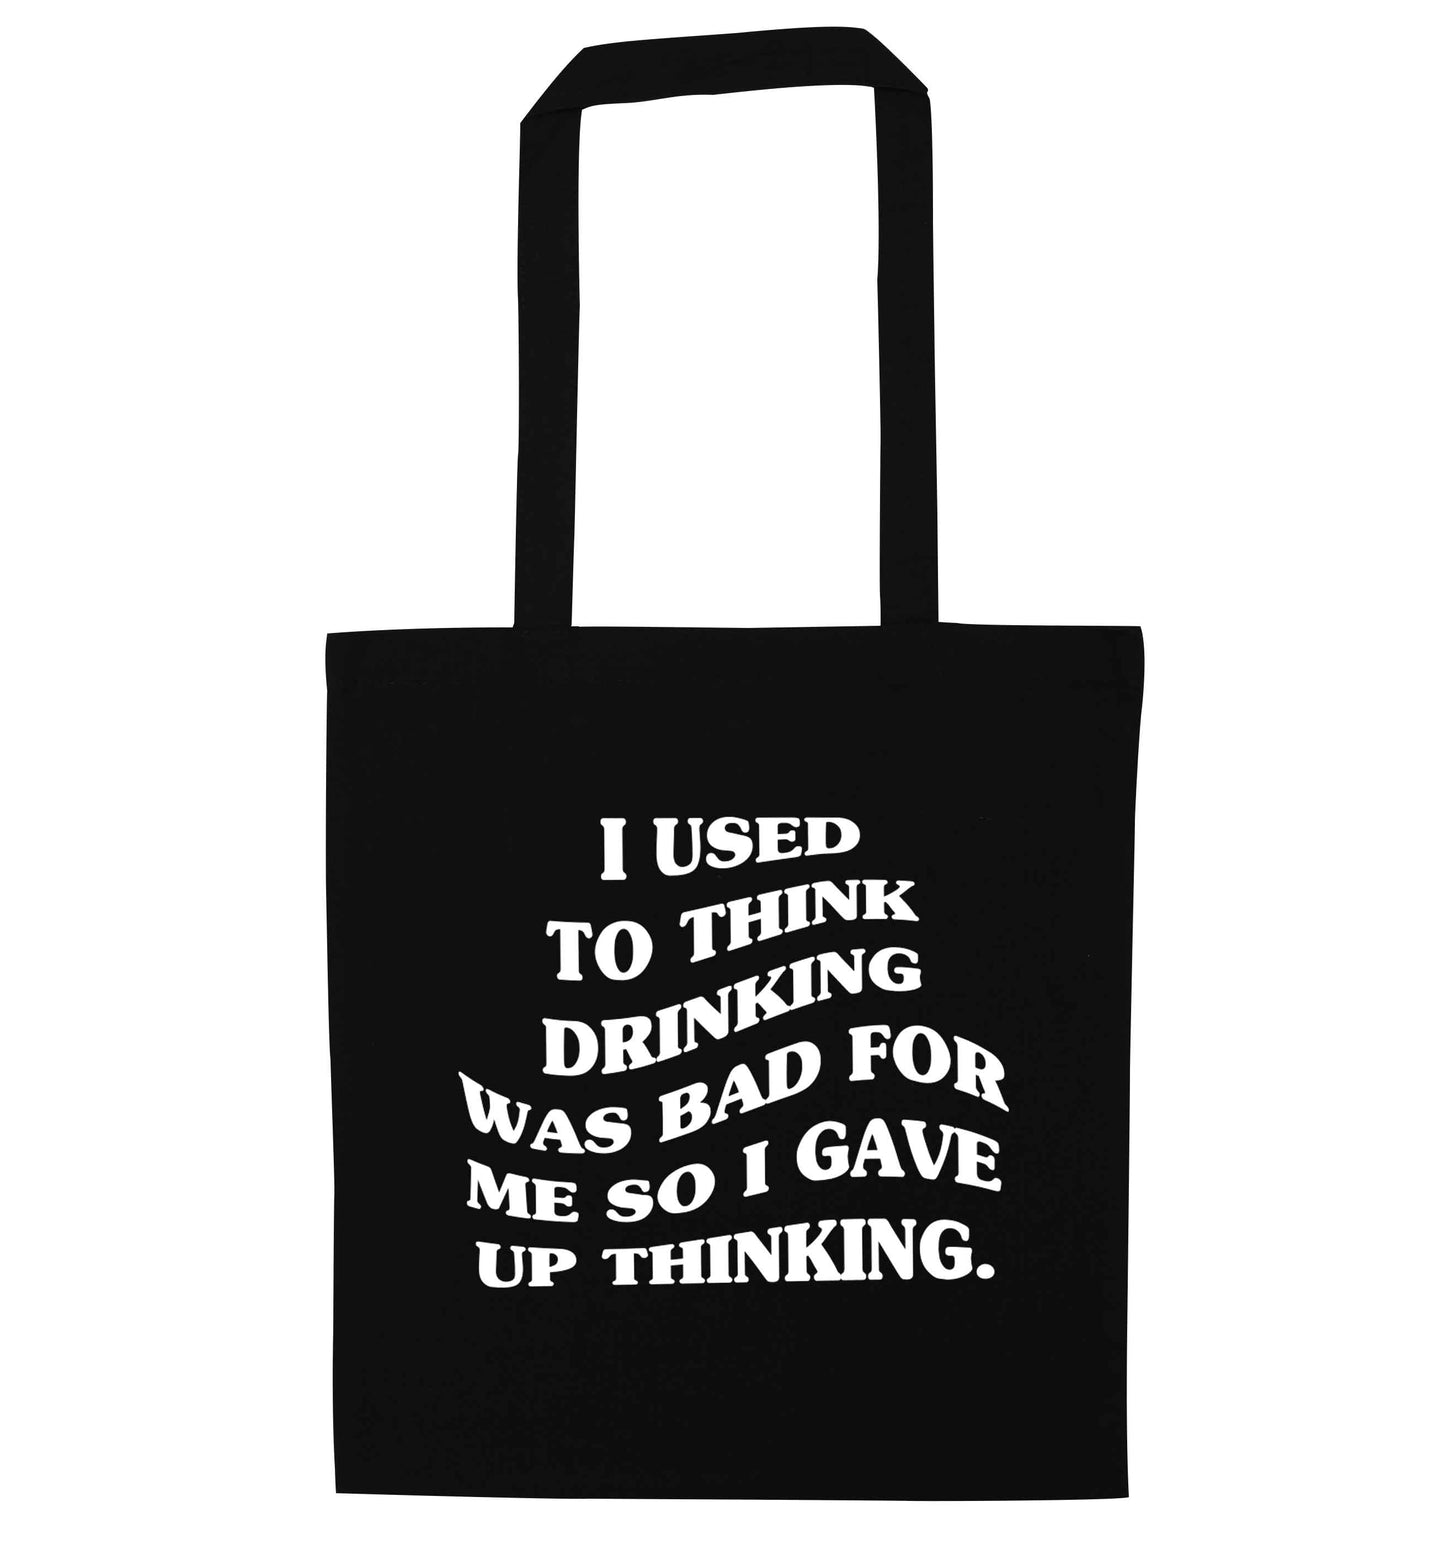 I used to think drinking was bad so I gave up thinking black tote bag